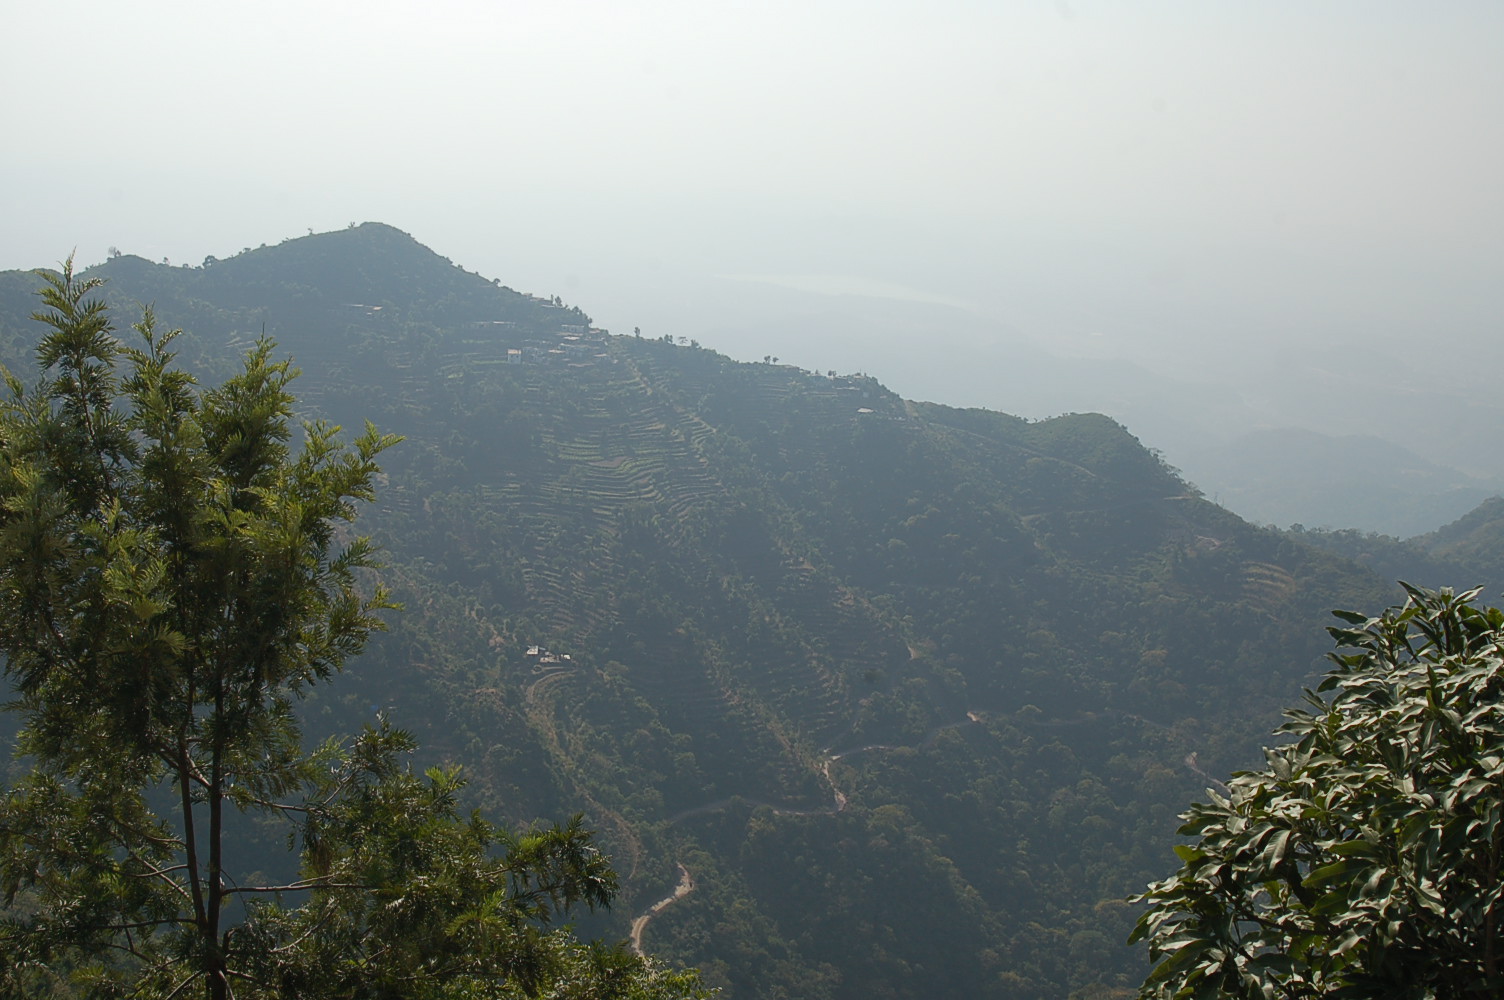 a scenic view of a mountain side area